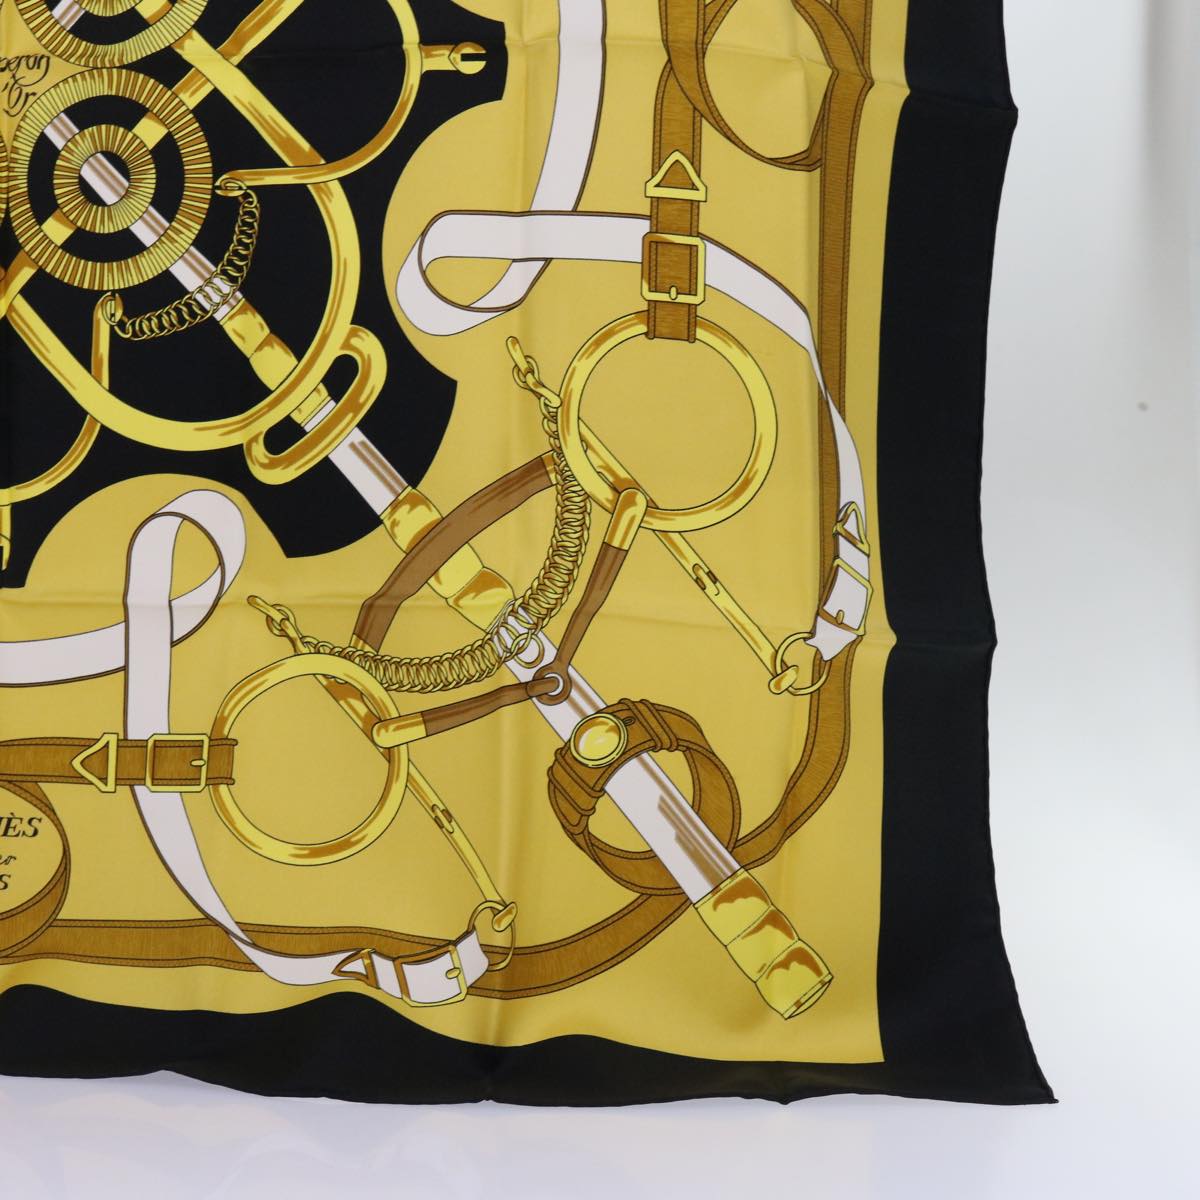 HERMES Carre 90 Eperon d'or Scarf Silk Gold Black Auth hk1056